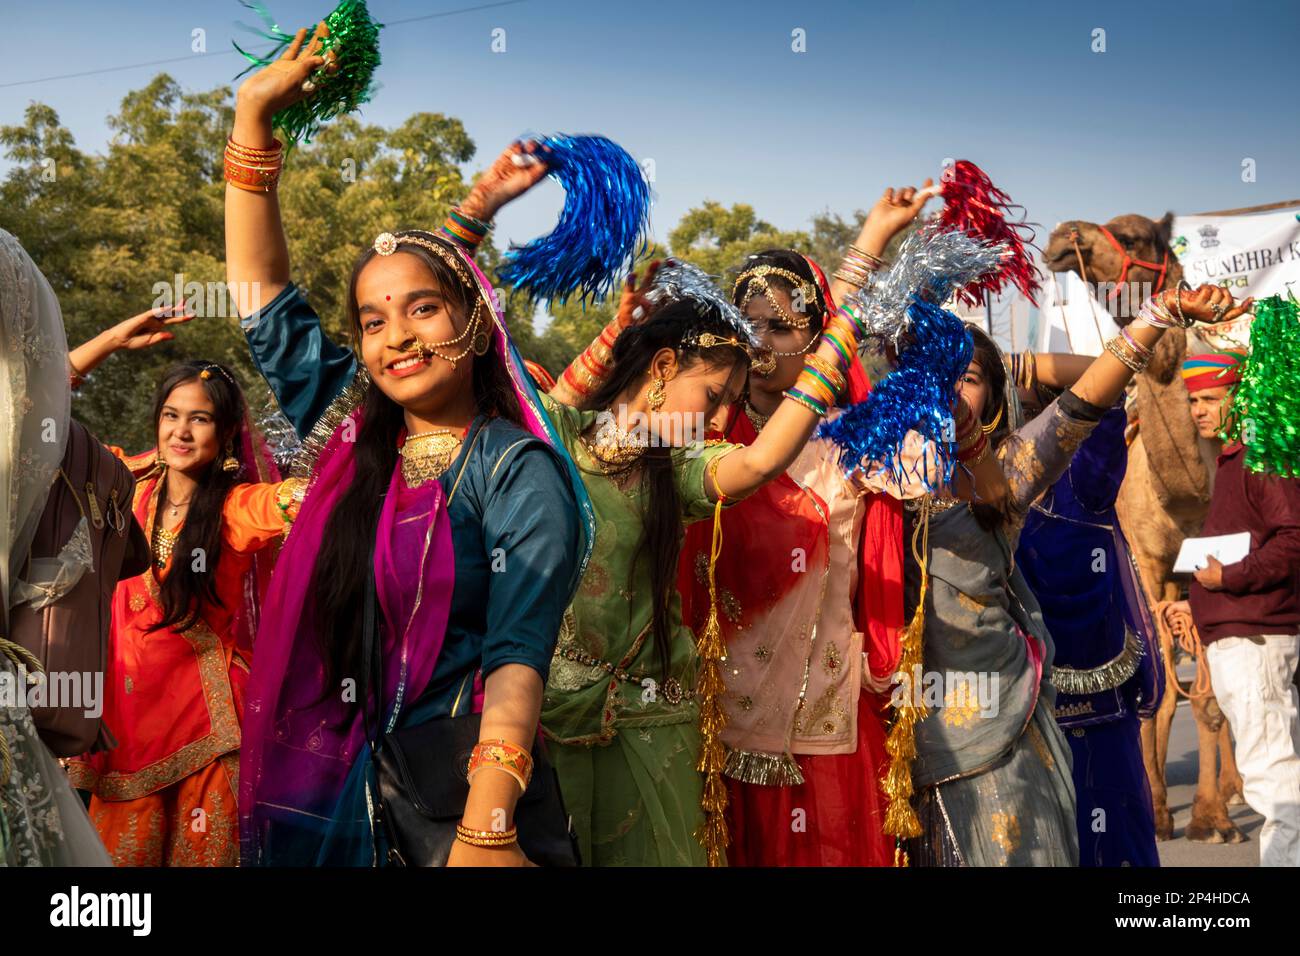 India, Rajasthan, Bikaner, Camel Festival Parade, culture, female dancers in traditional Rajasthani dress Stock Photo